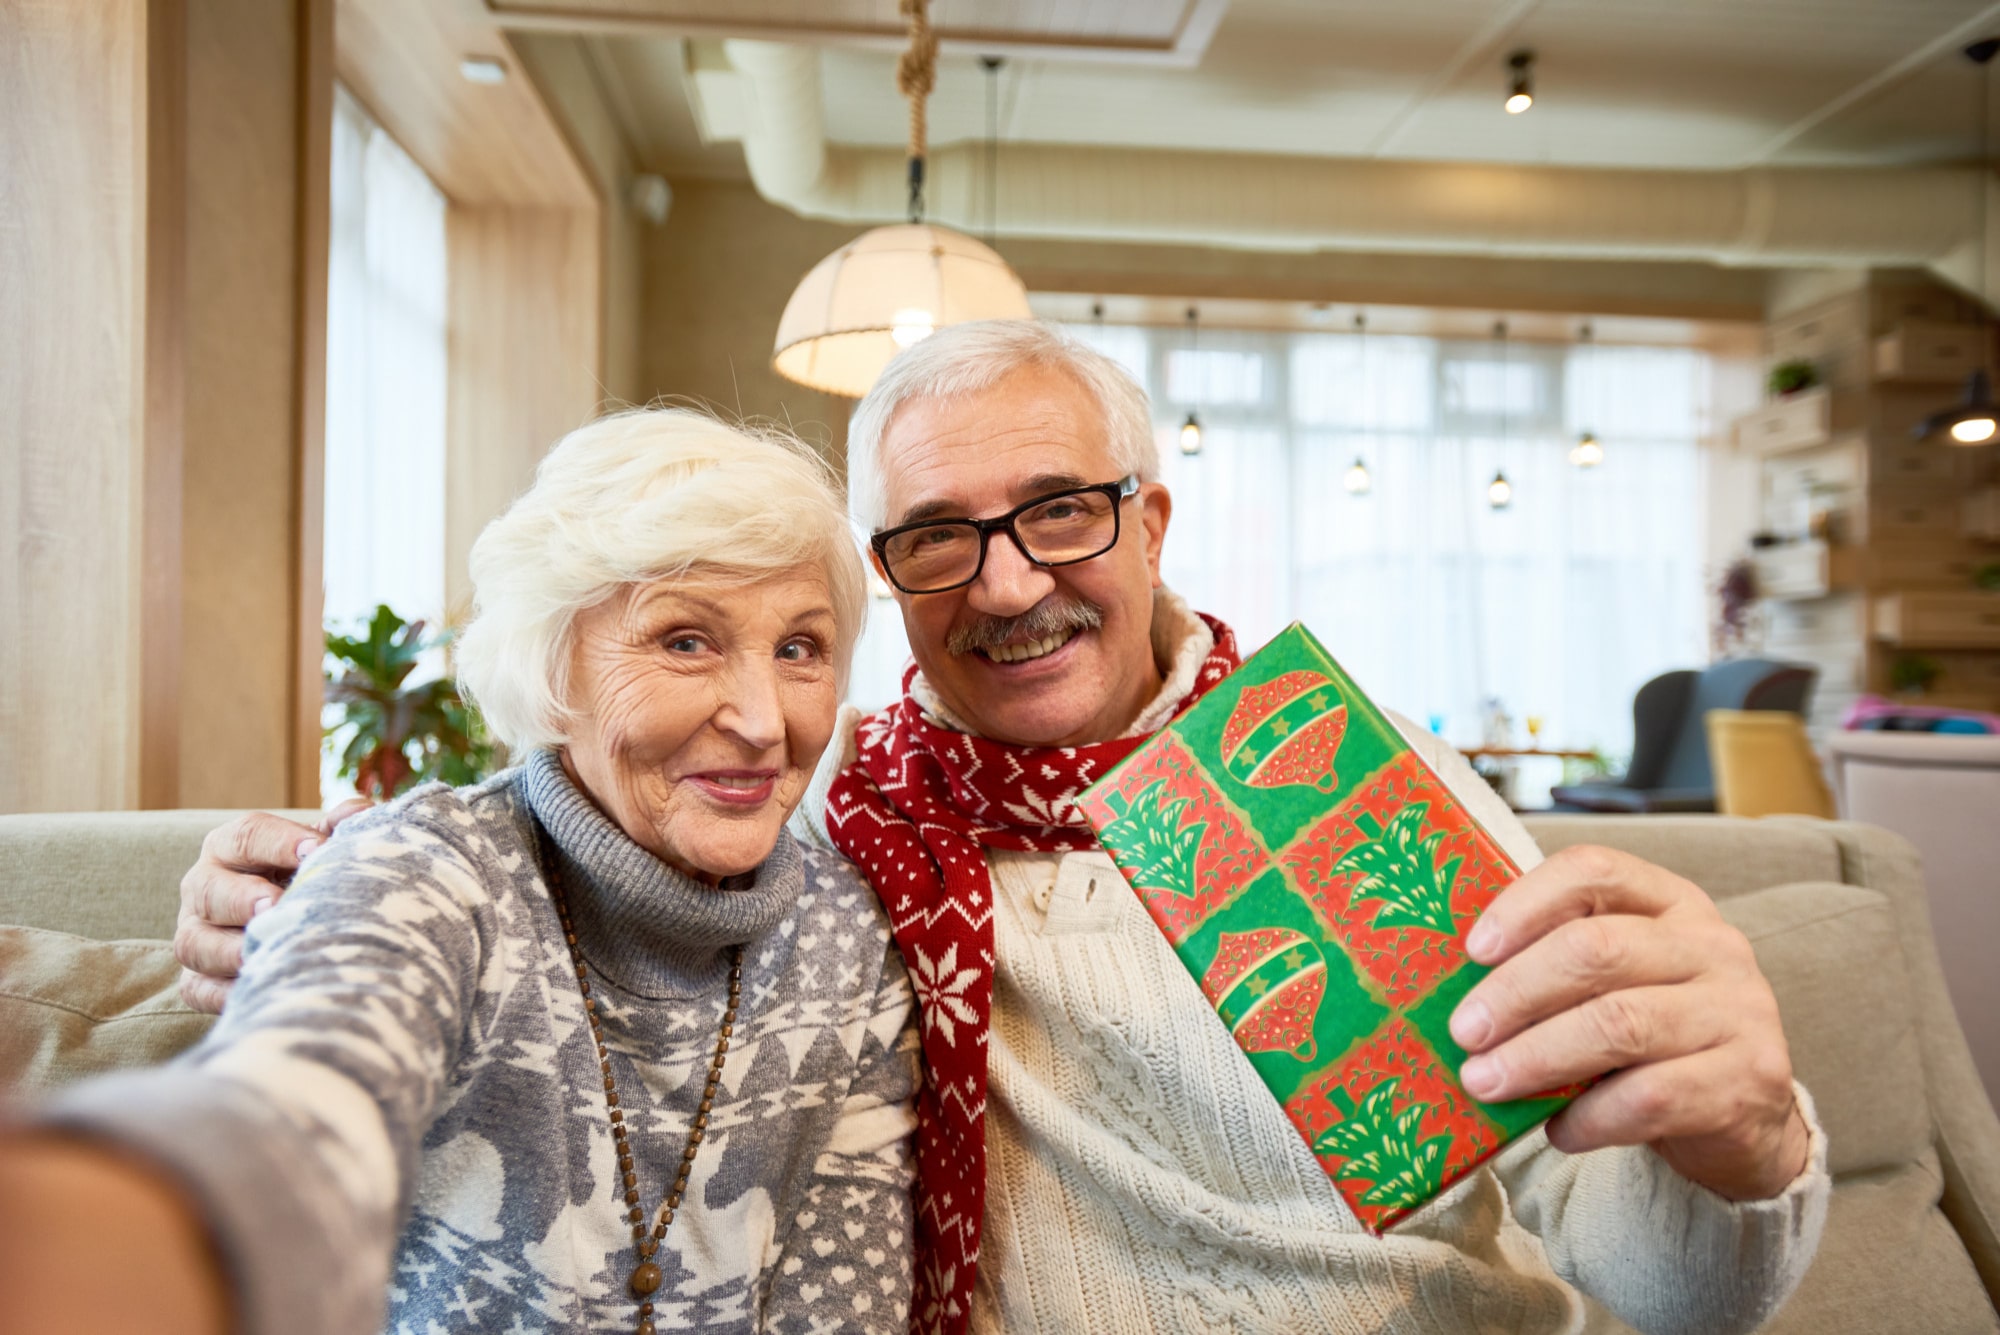 Thoughtful Gift Ideas for Grandparents